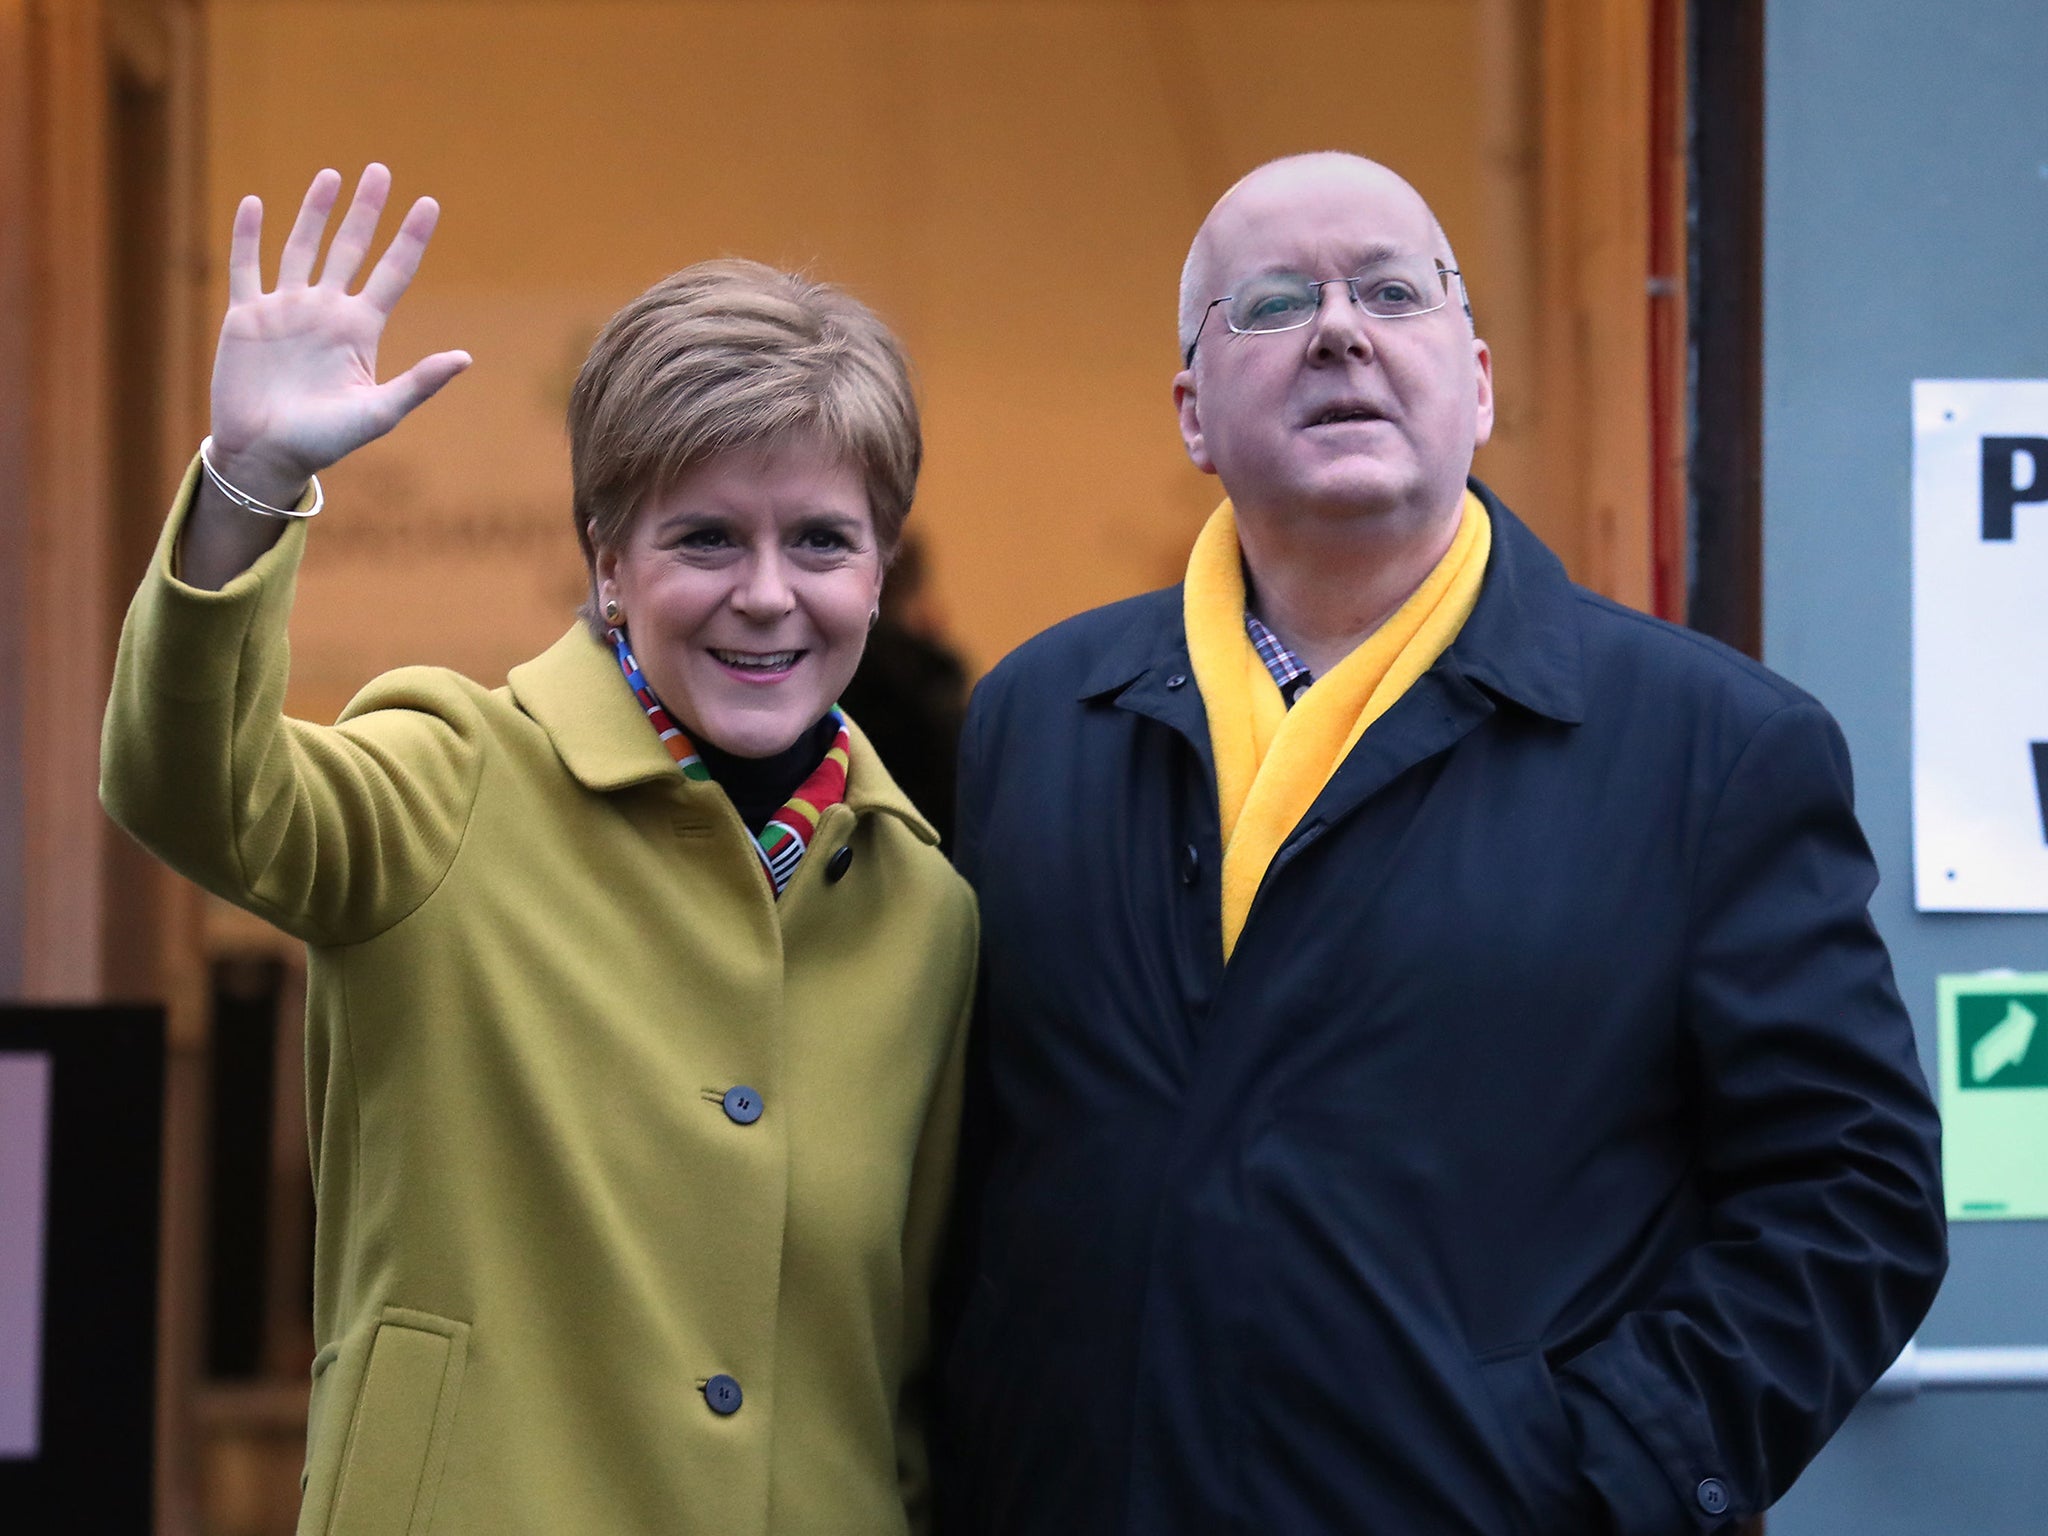 There’s been no word from Sturgeon or Murrell since the arrest